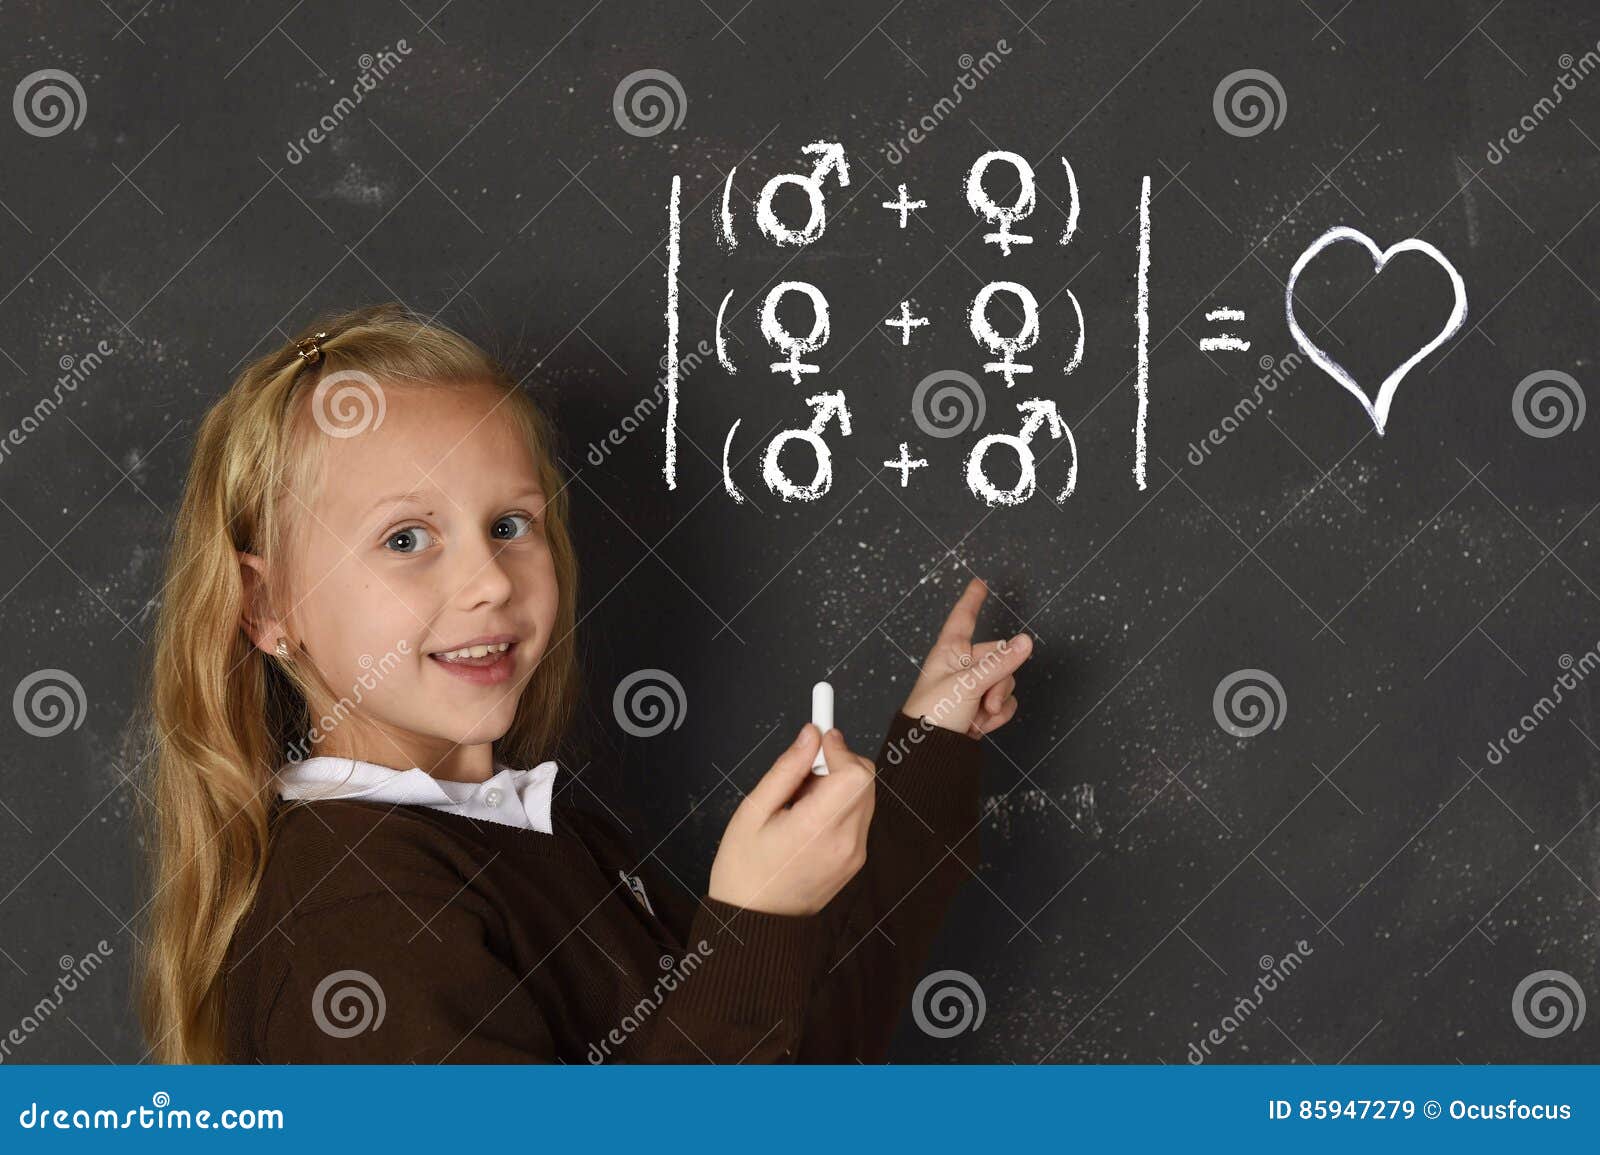 schoolgirl in uniform holding chalk writing on blackboard standing for freedom of sexuality orientation